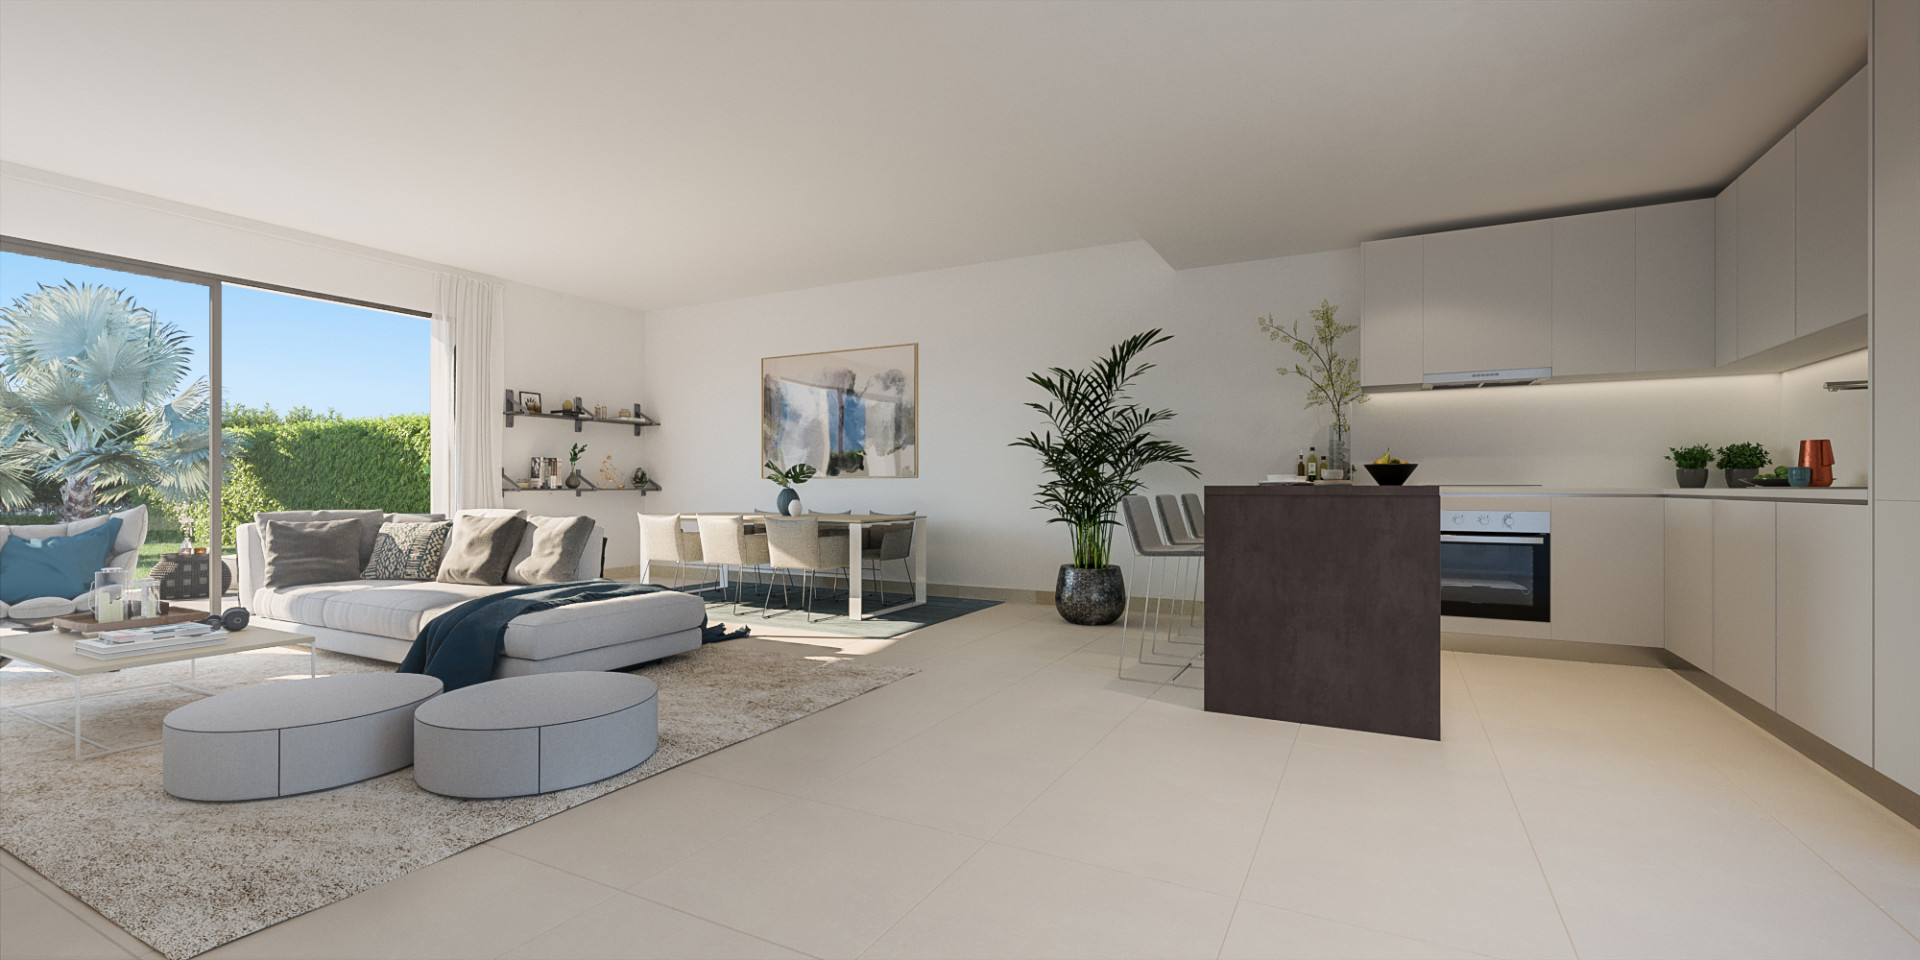 Ipanema: Modern flats and penthouses with privileged location in La Cala de Mijas. | Image 7